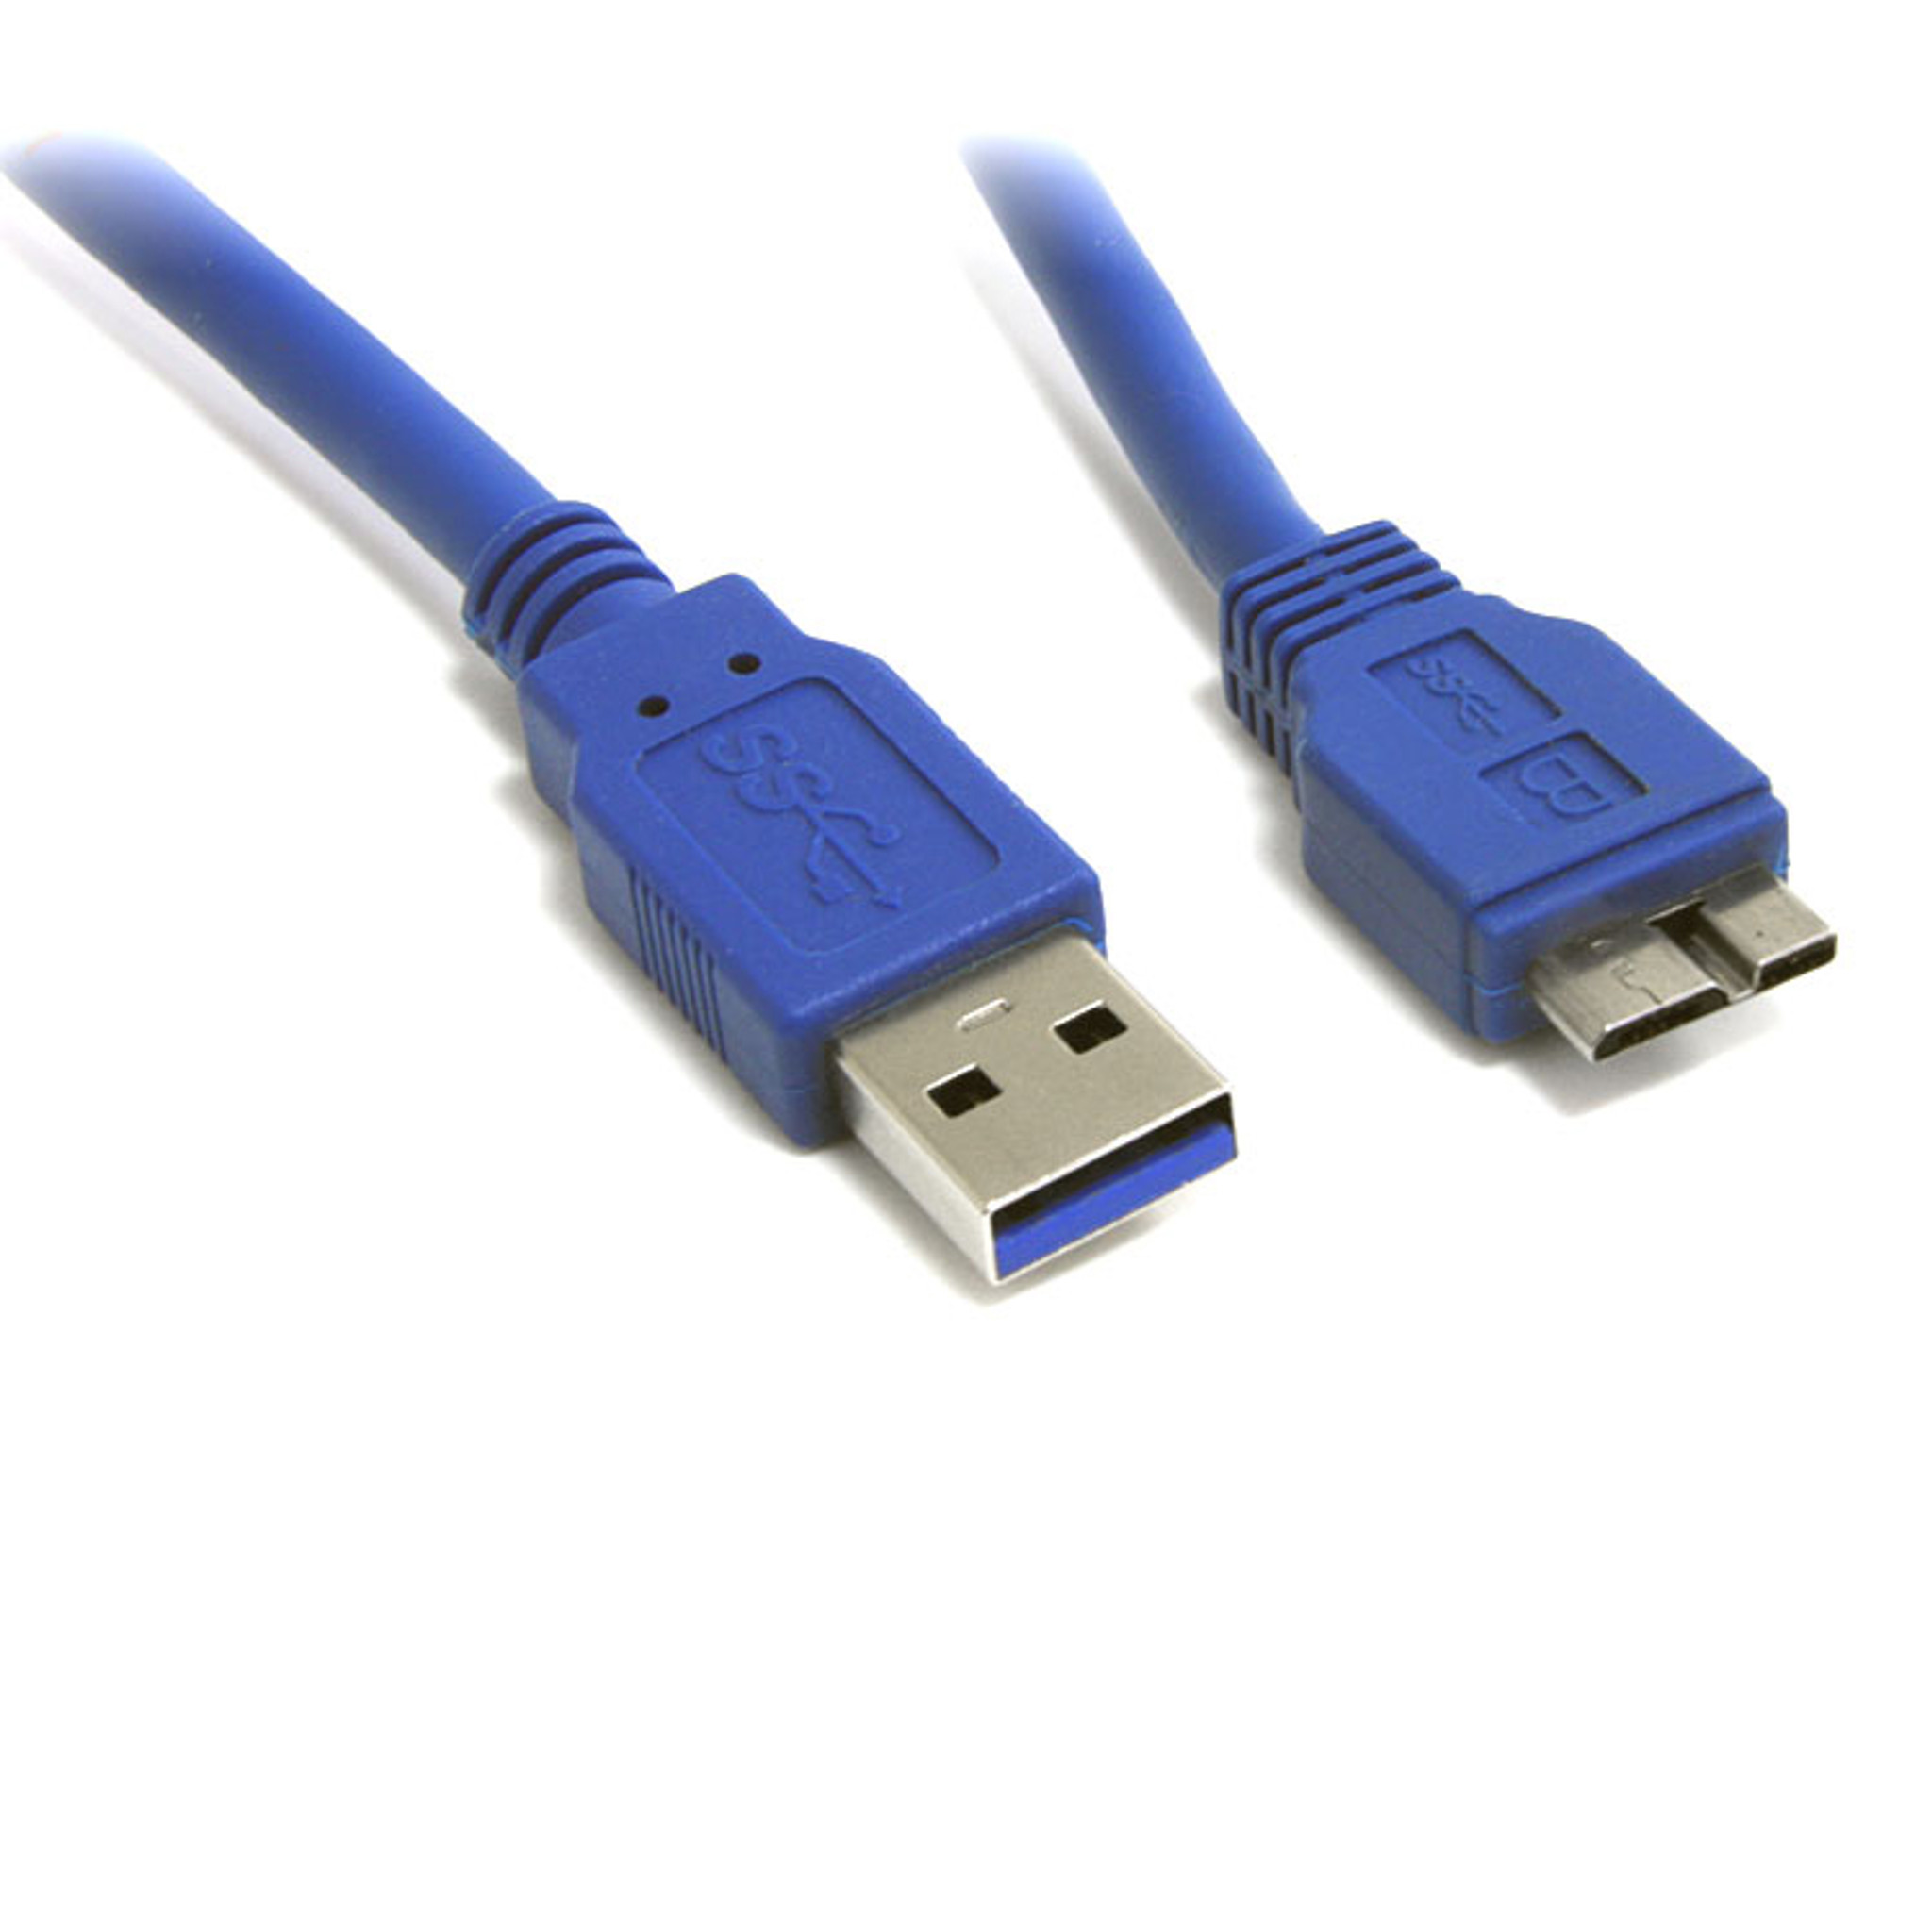 3m Black SuperSpeed USB 3.0 Cable A to B - USB 3.0 Cables